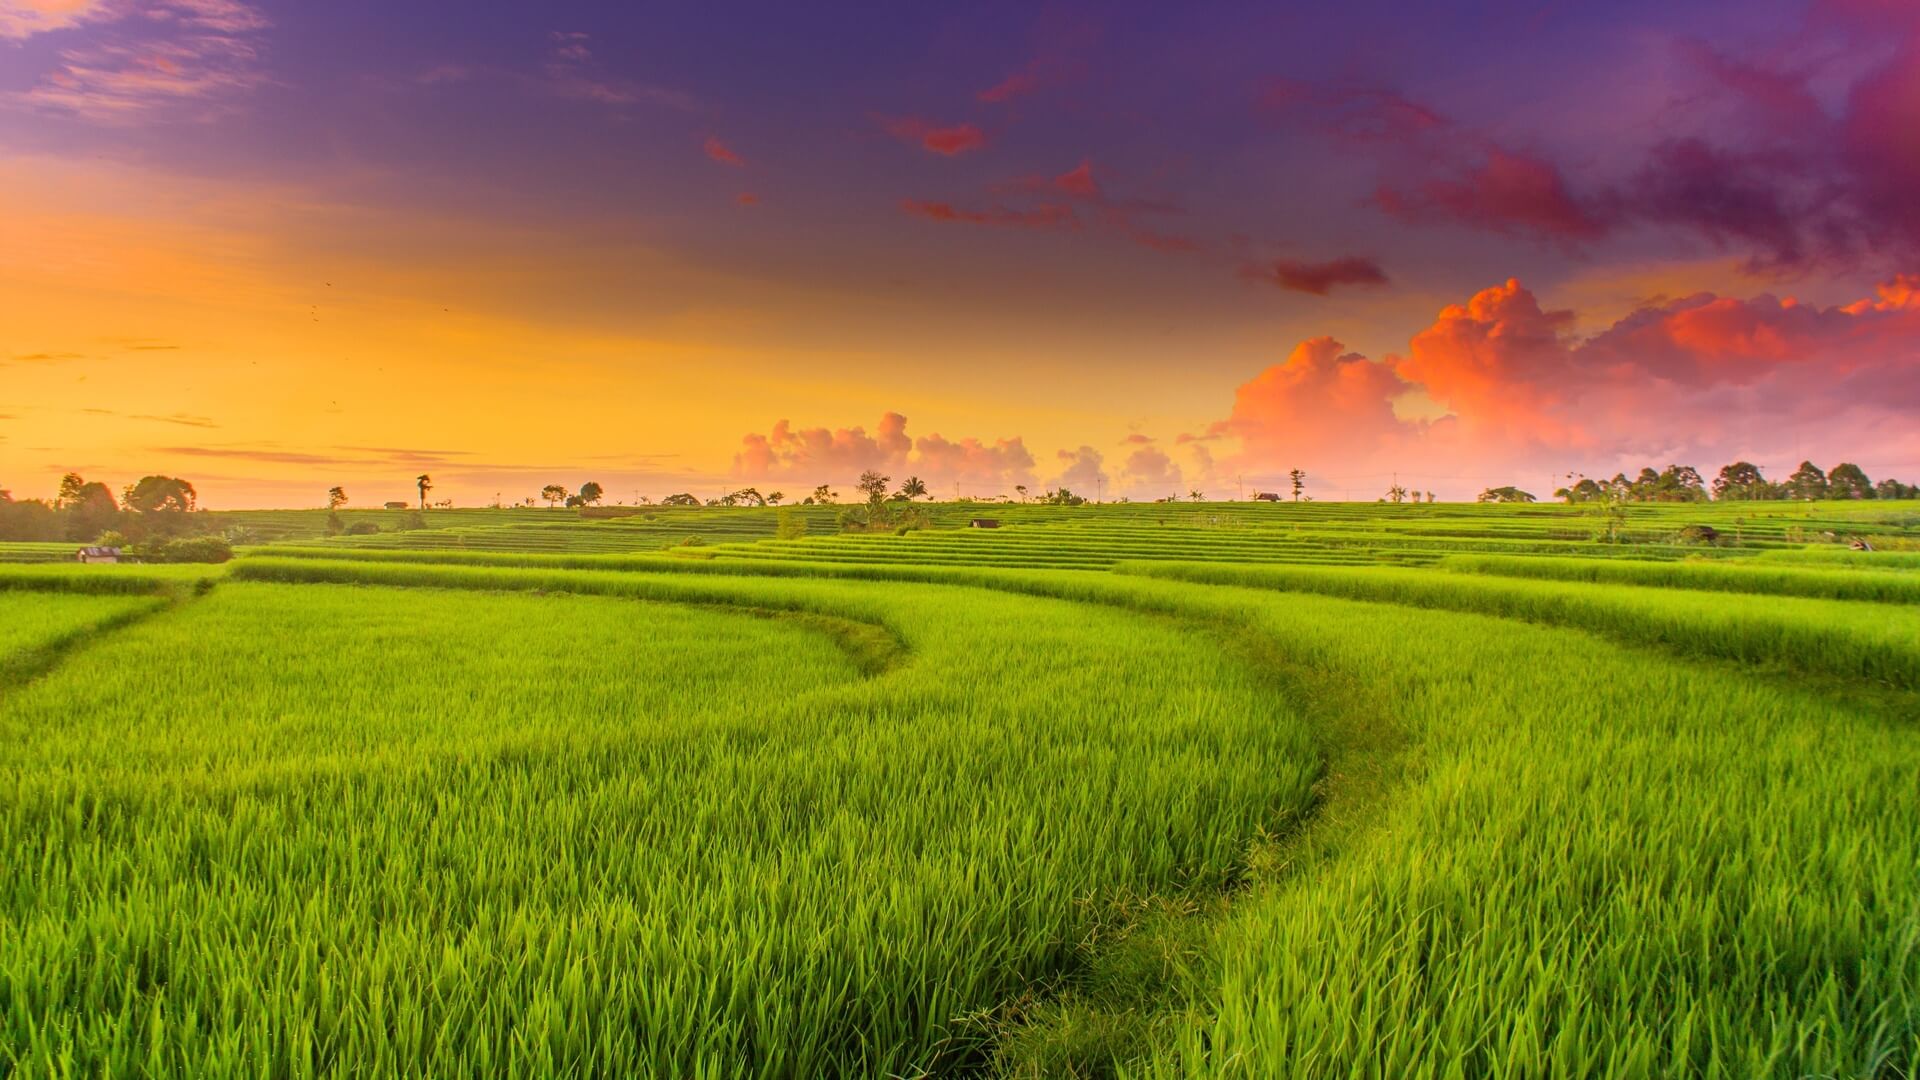 Further improvement of the draft Decree on land for rice cultivation in Vietnam 